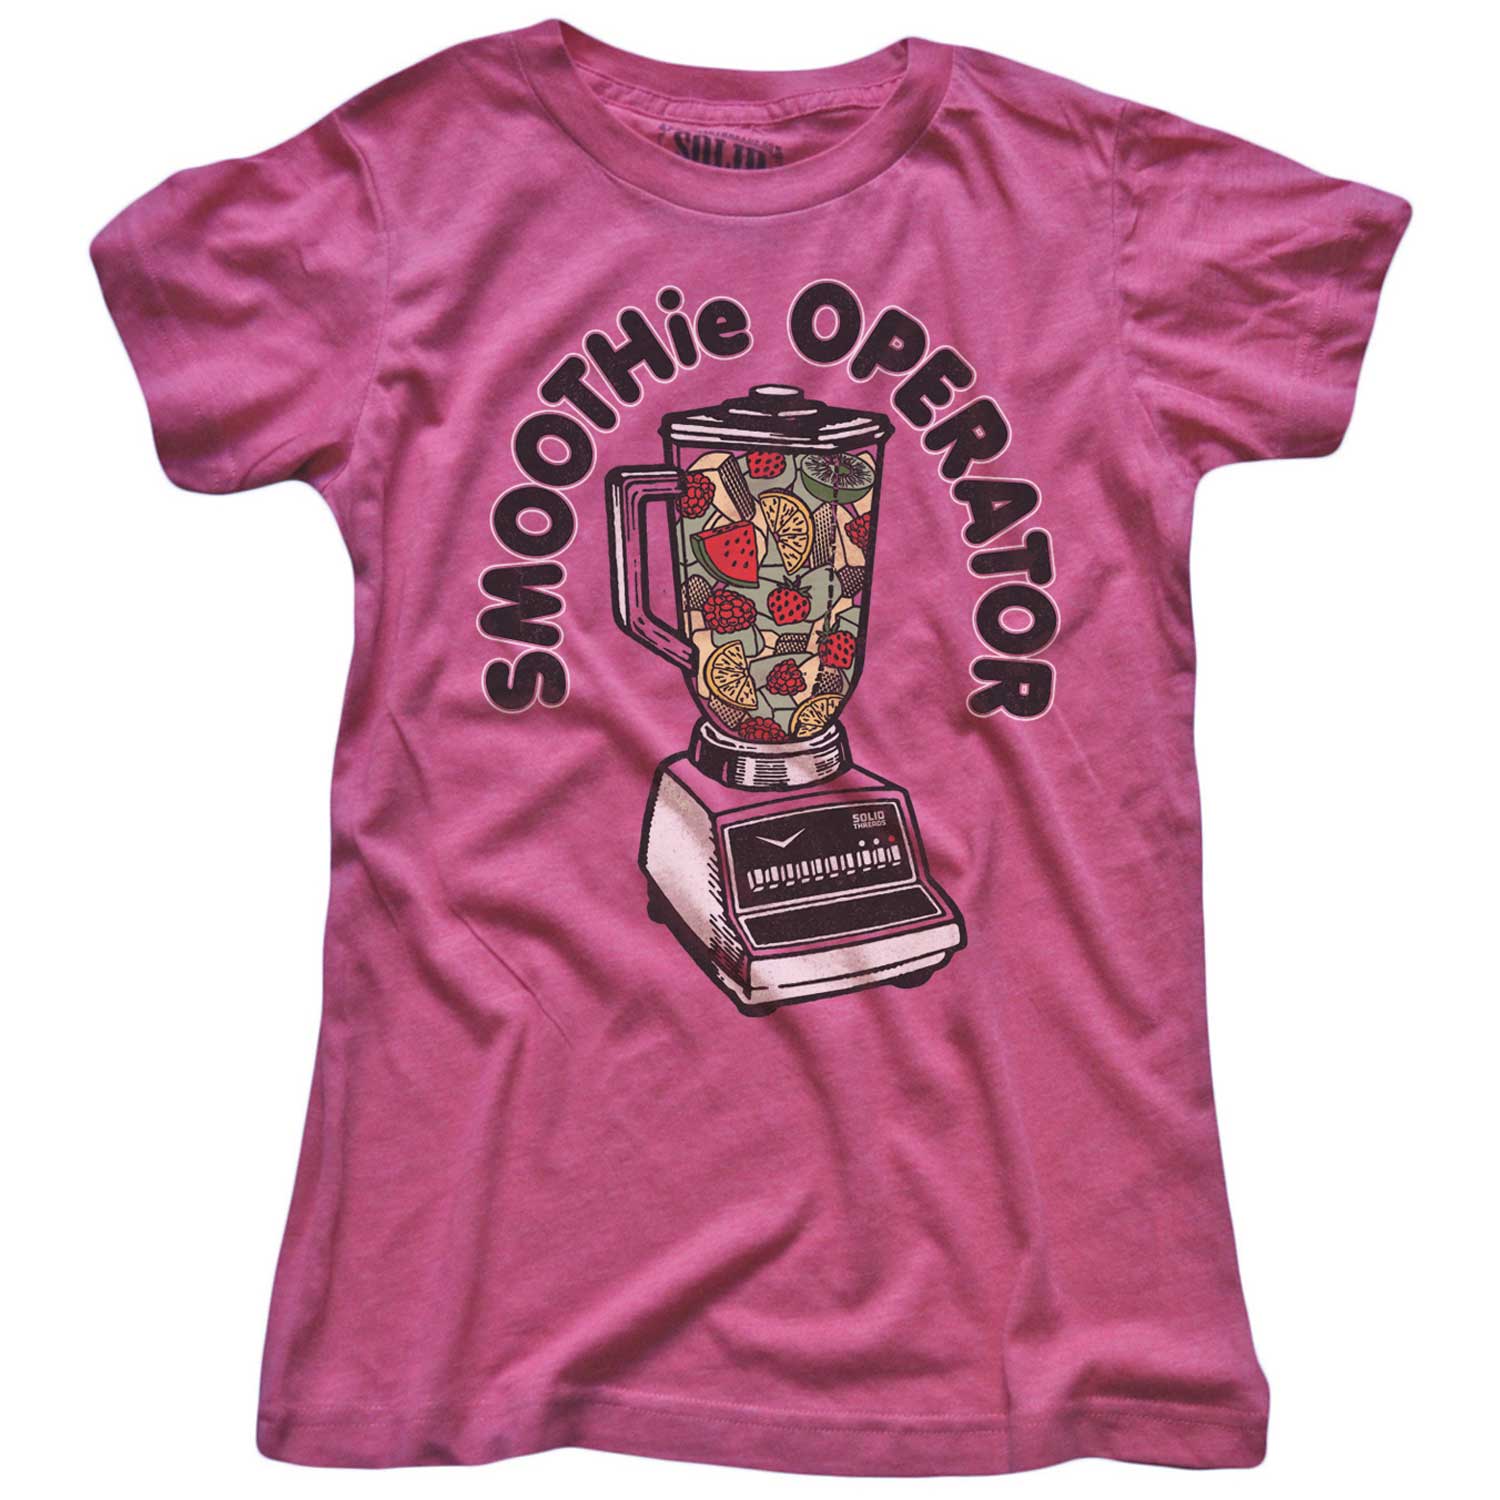 Women's Smoothie Operator Vintage Graphic Crop Top | Funny Blender T-shirt | Solid Threads